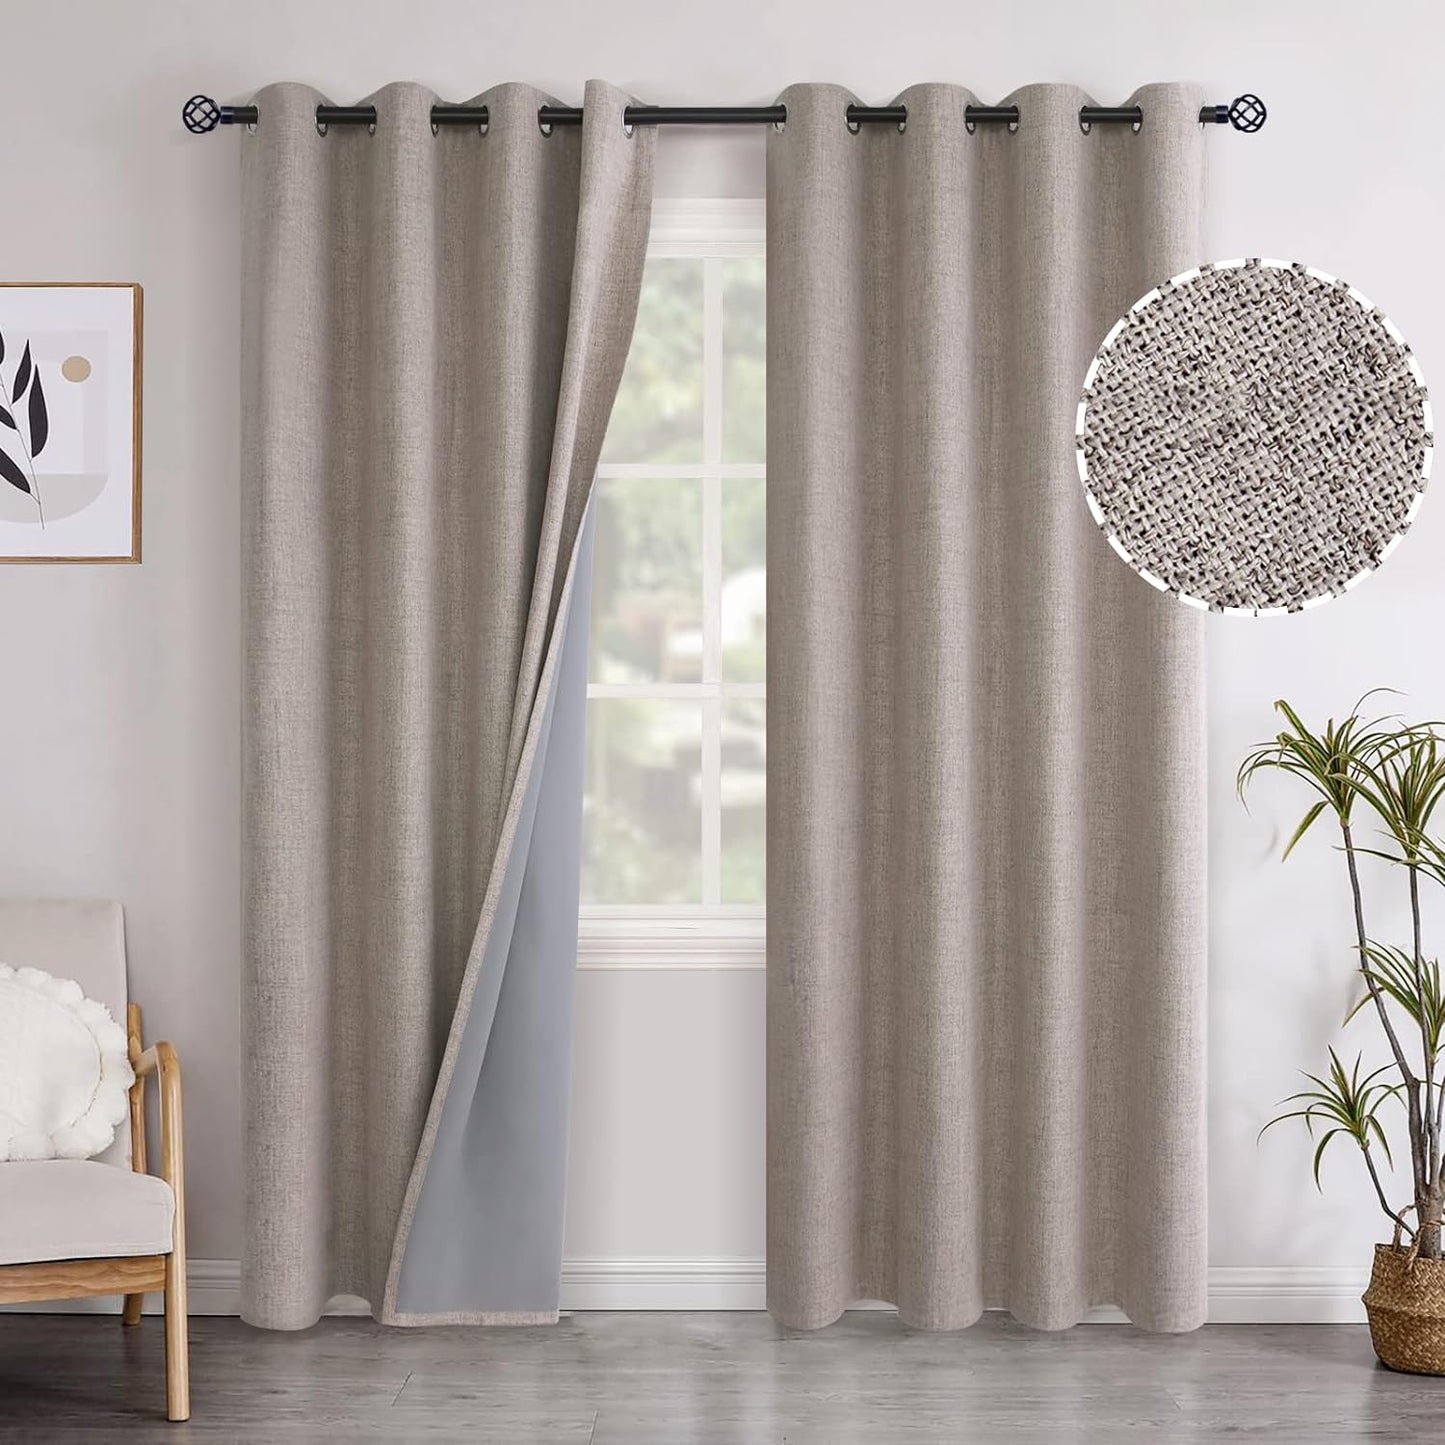 Youngstex Linen Blackout Curtains 63 Inch Length, Grommet Darkening Bedroom Curtains Burlap Linen Window Drapes Thermal Insulated for Basement Summer Heat, 2 Panels, 52 X 63 Inch, Beige  YoungsTex Burlap 52W X 90L 